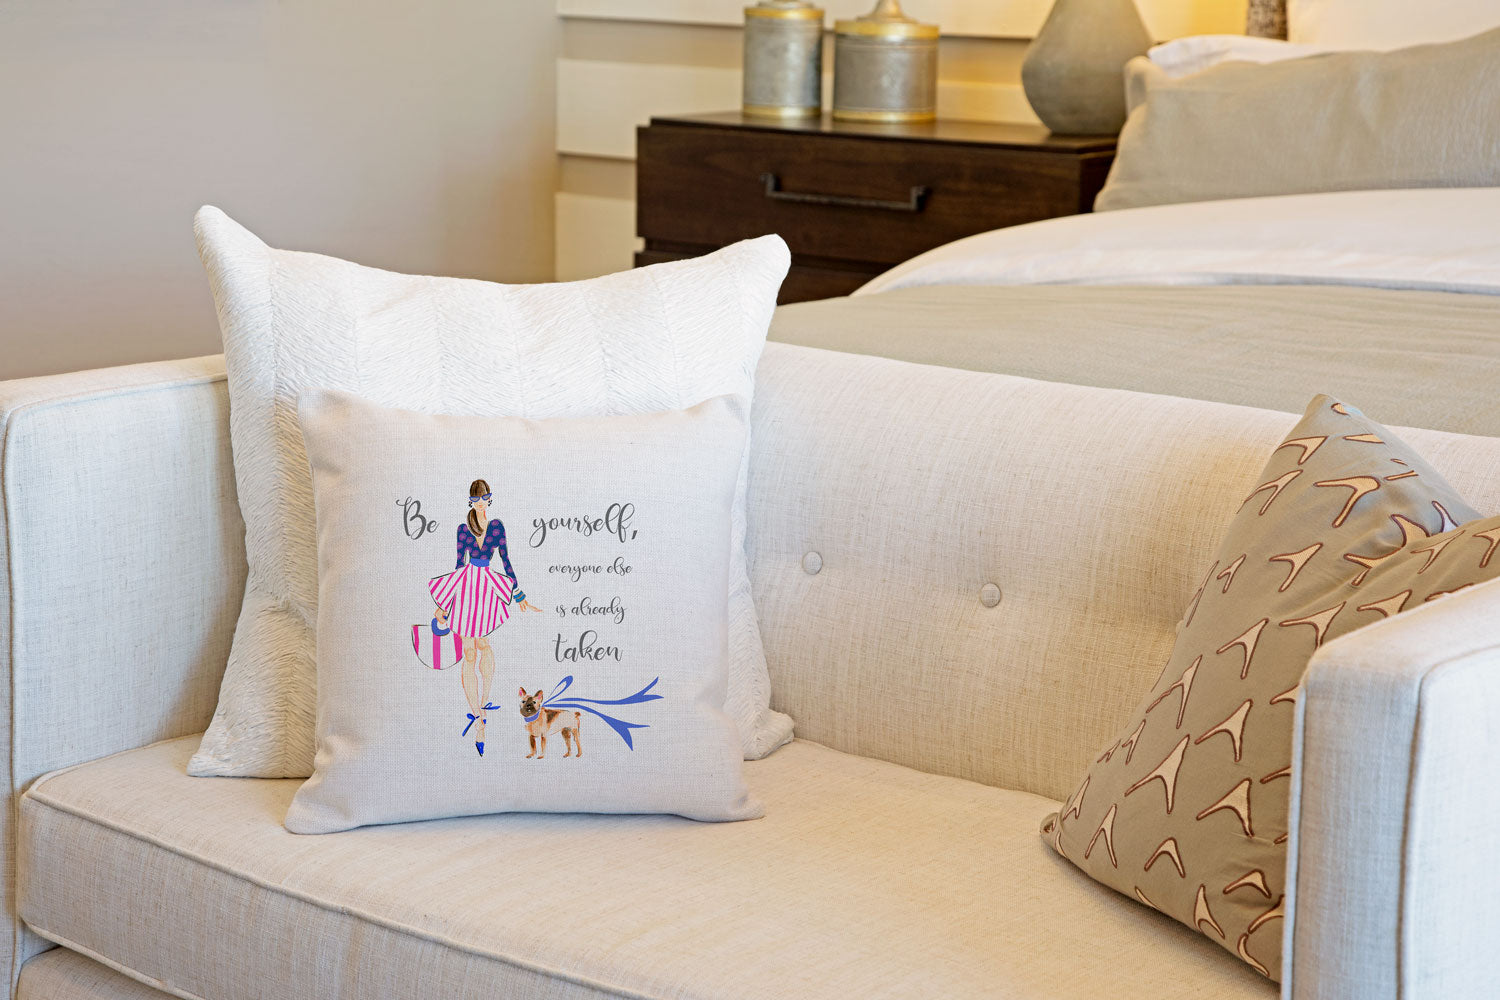 All About Me Throw Pillow Cover - Fashion Illustrations Throw Pillow Cover Collection-Di Lewis